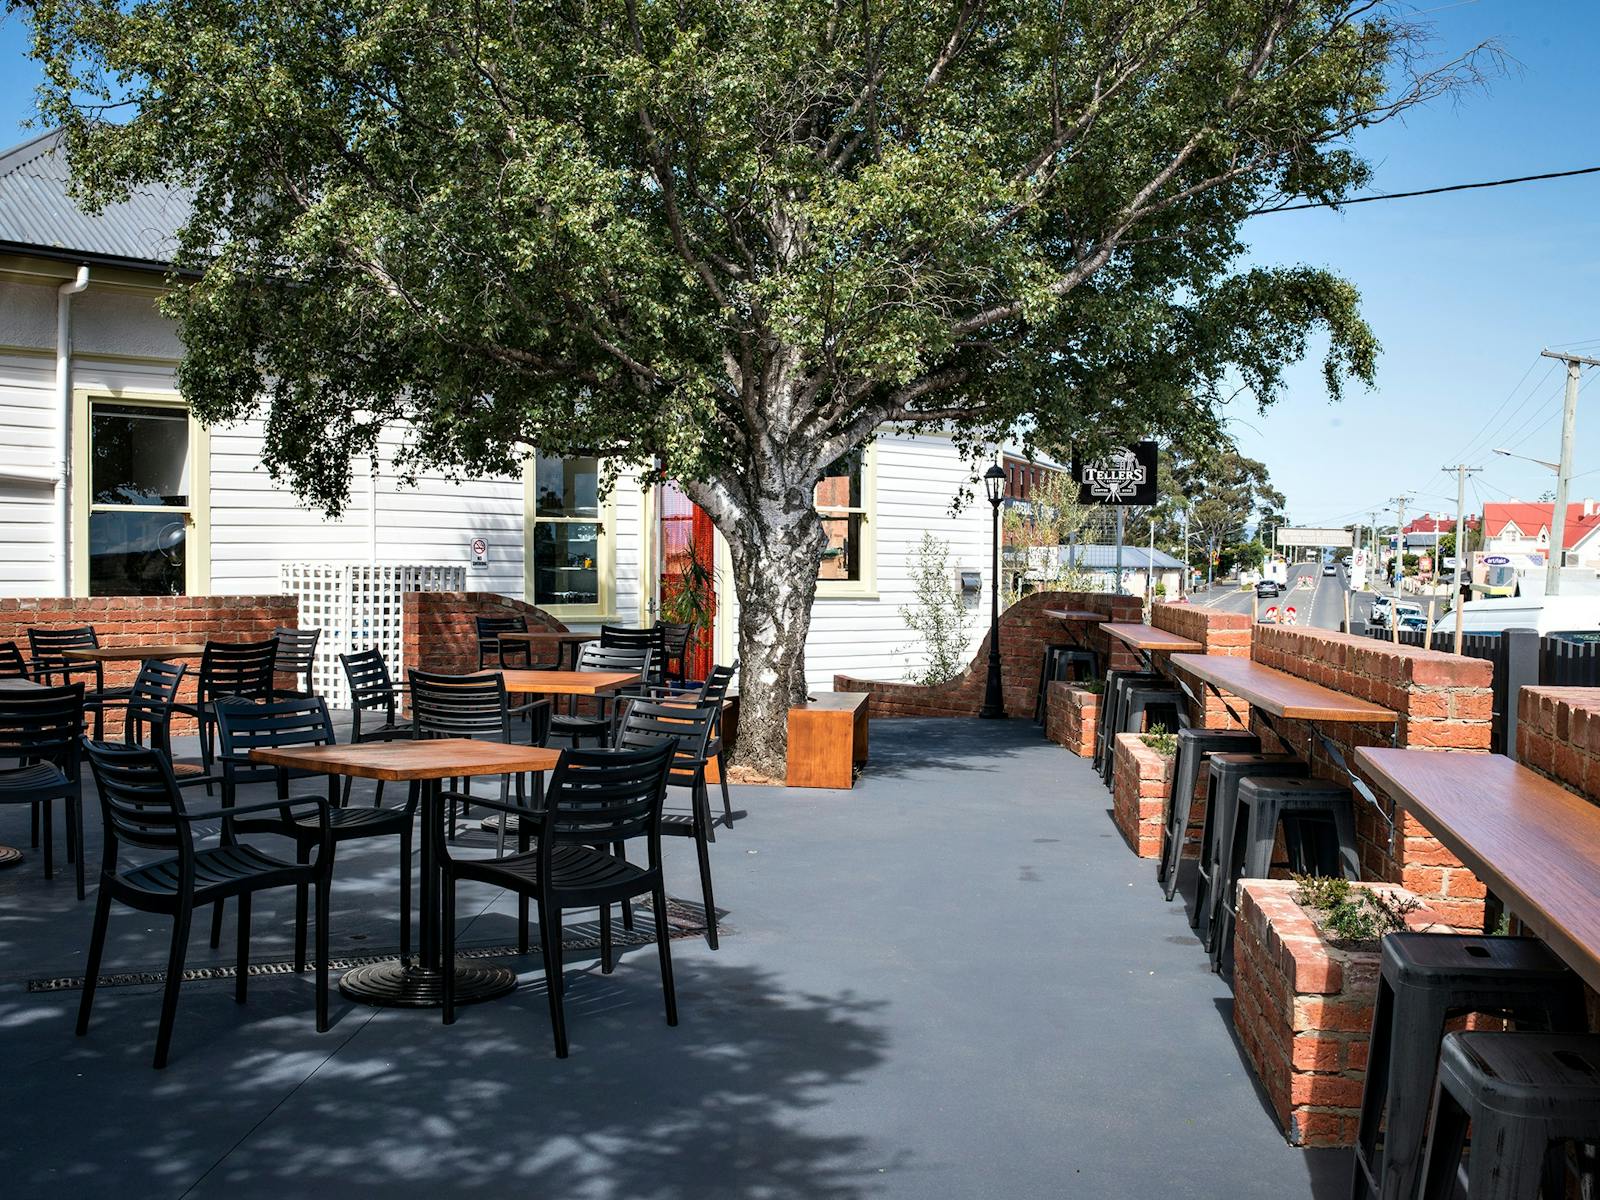 View of the exterior courtyard and seating